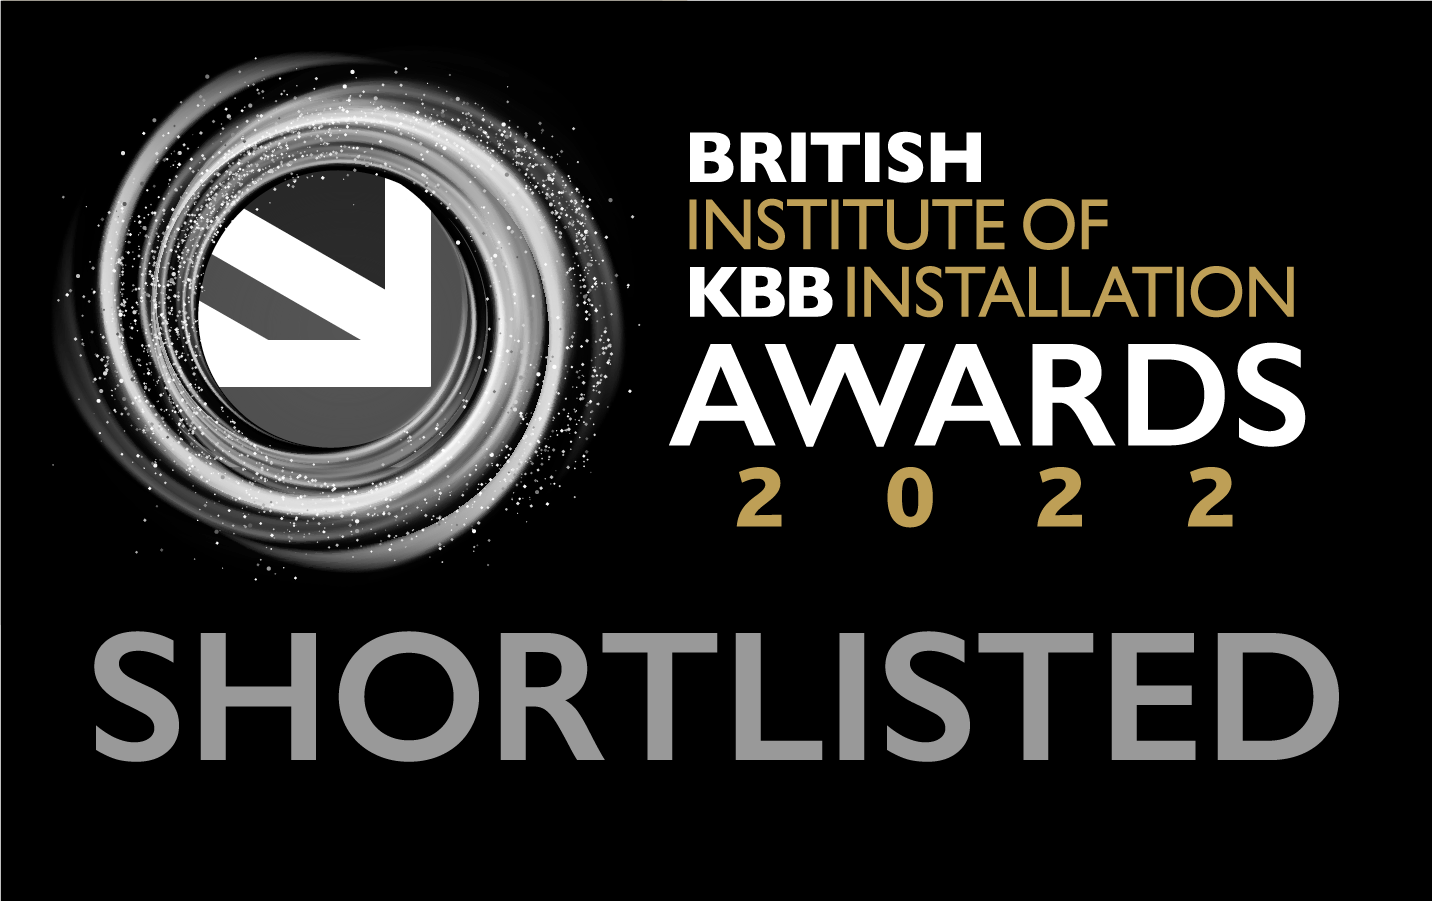 British Institute of KBB Installation Awards - Shortlisted for National Retailer of the Year